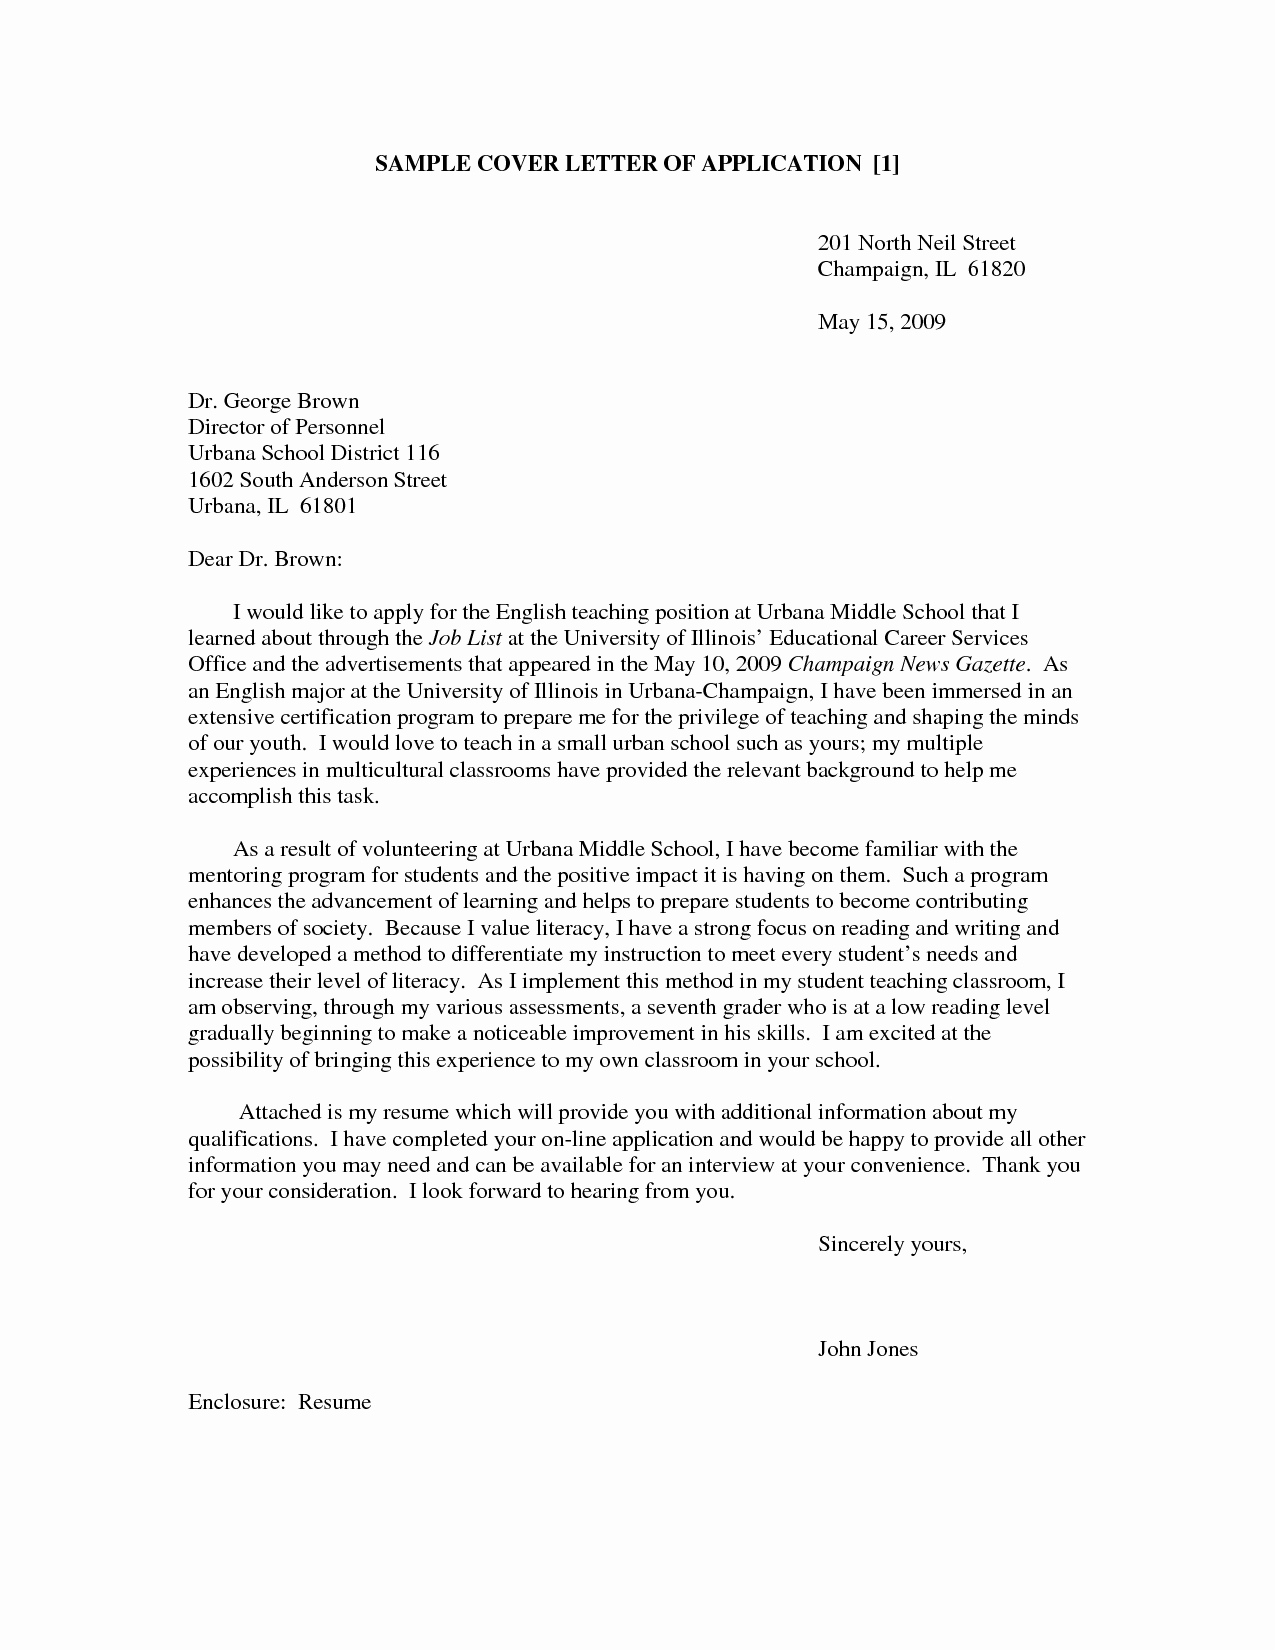 Letters Of Application Examples Elegant Application Letter Sample In English Application Letter